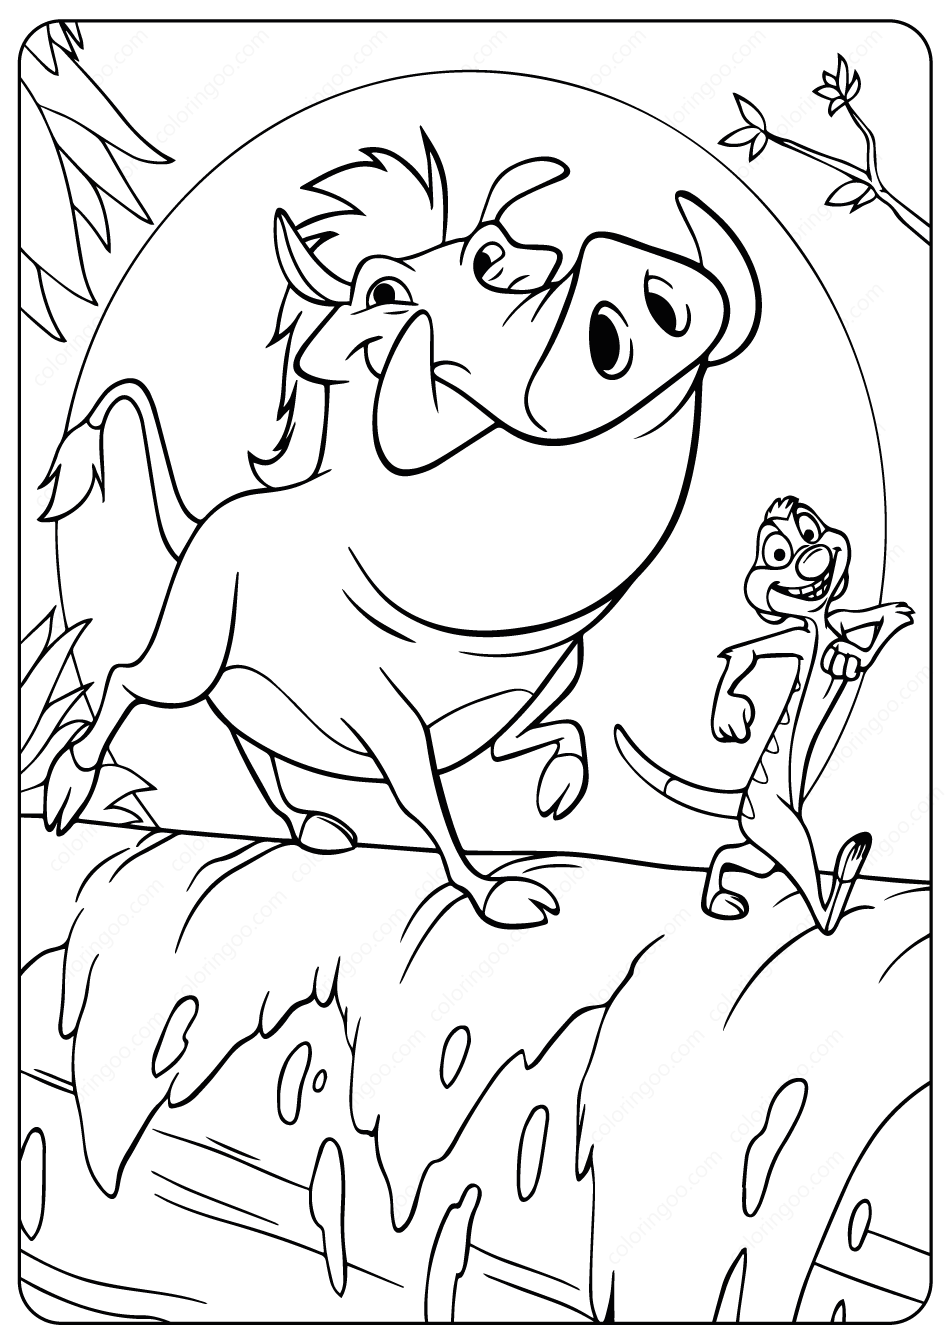 Colorful lion king coloring pages